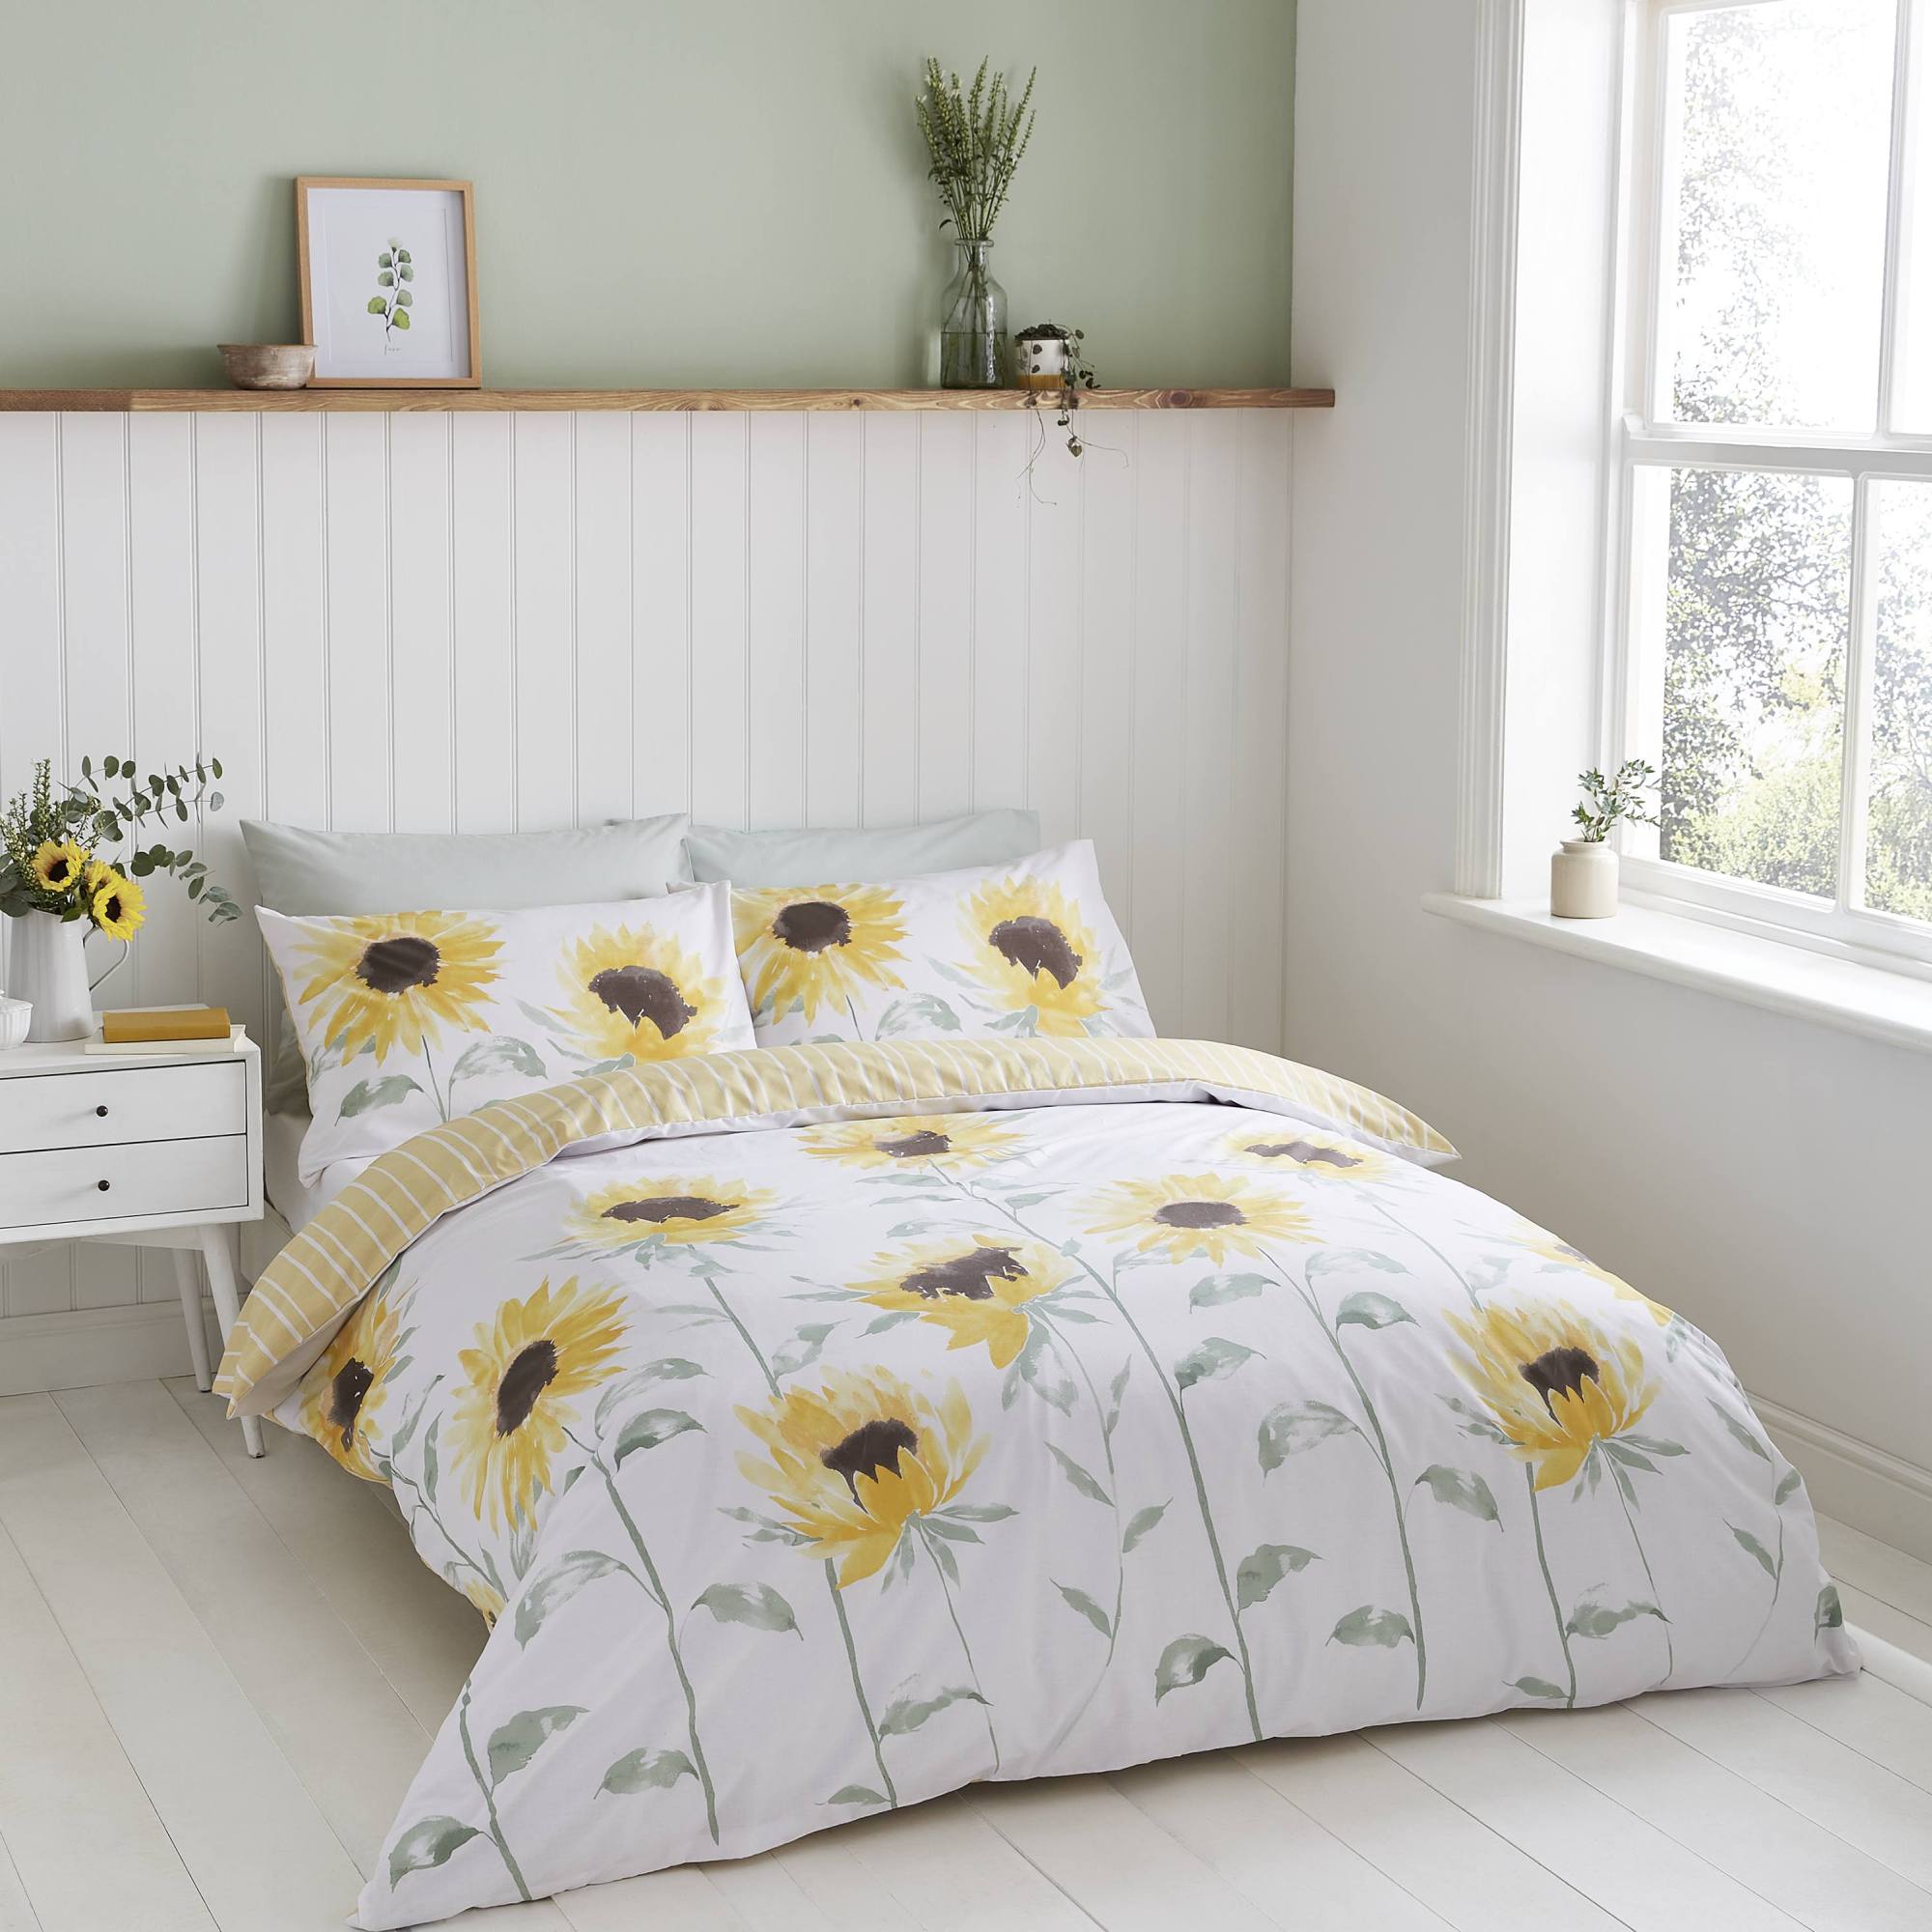 Photos - Pillowcase Catherine Lansfield Painted Sunflowers Duvet Cover and  Set Yell 